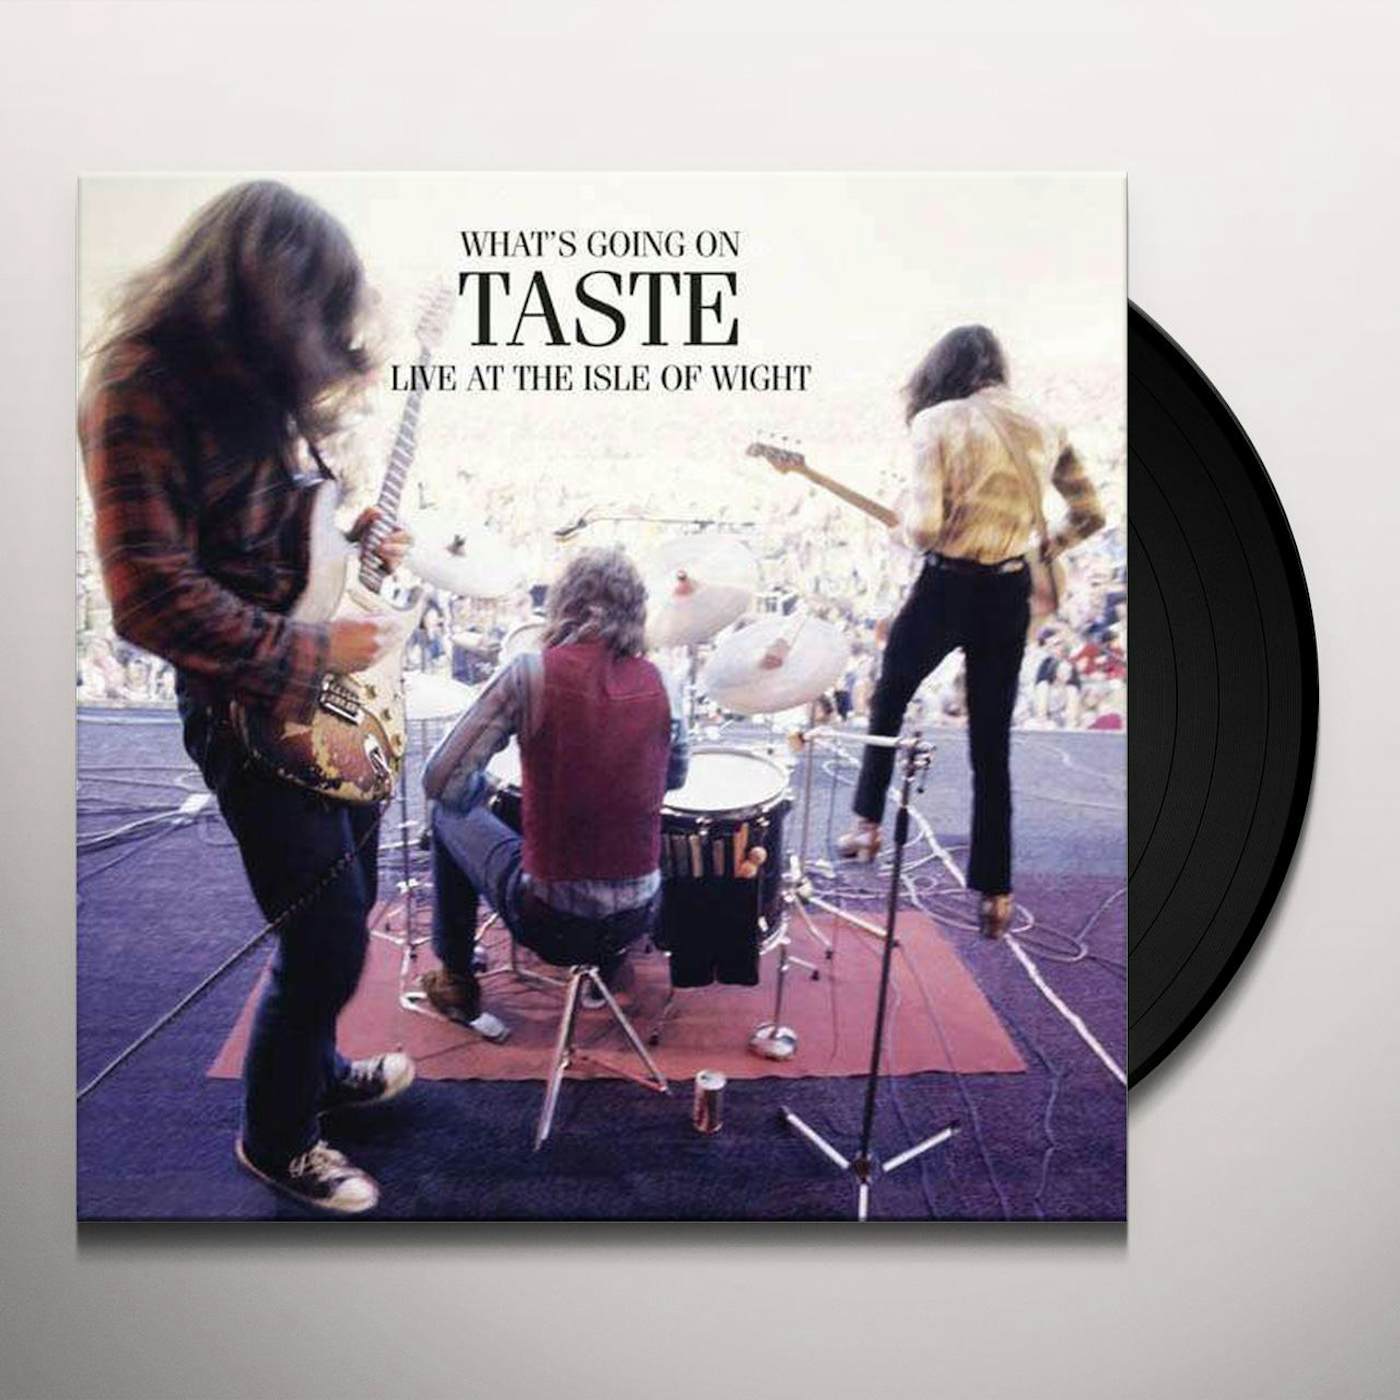 WHAT'S GOING ON TASTE LIVE AT ISLE OF WIGHT 1970 Vinyl Record